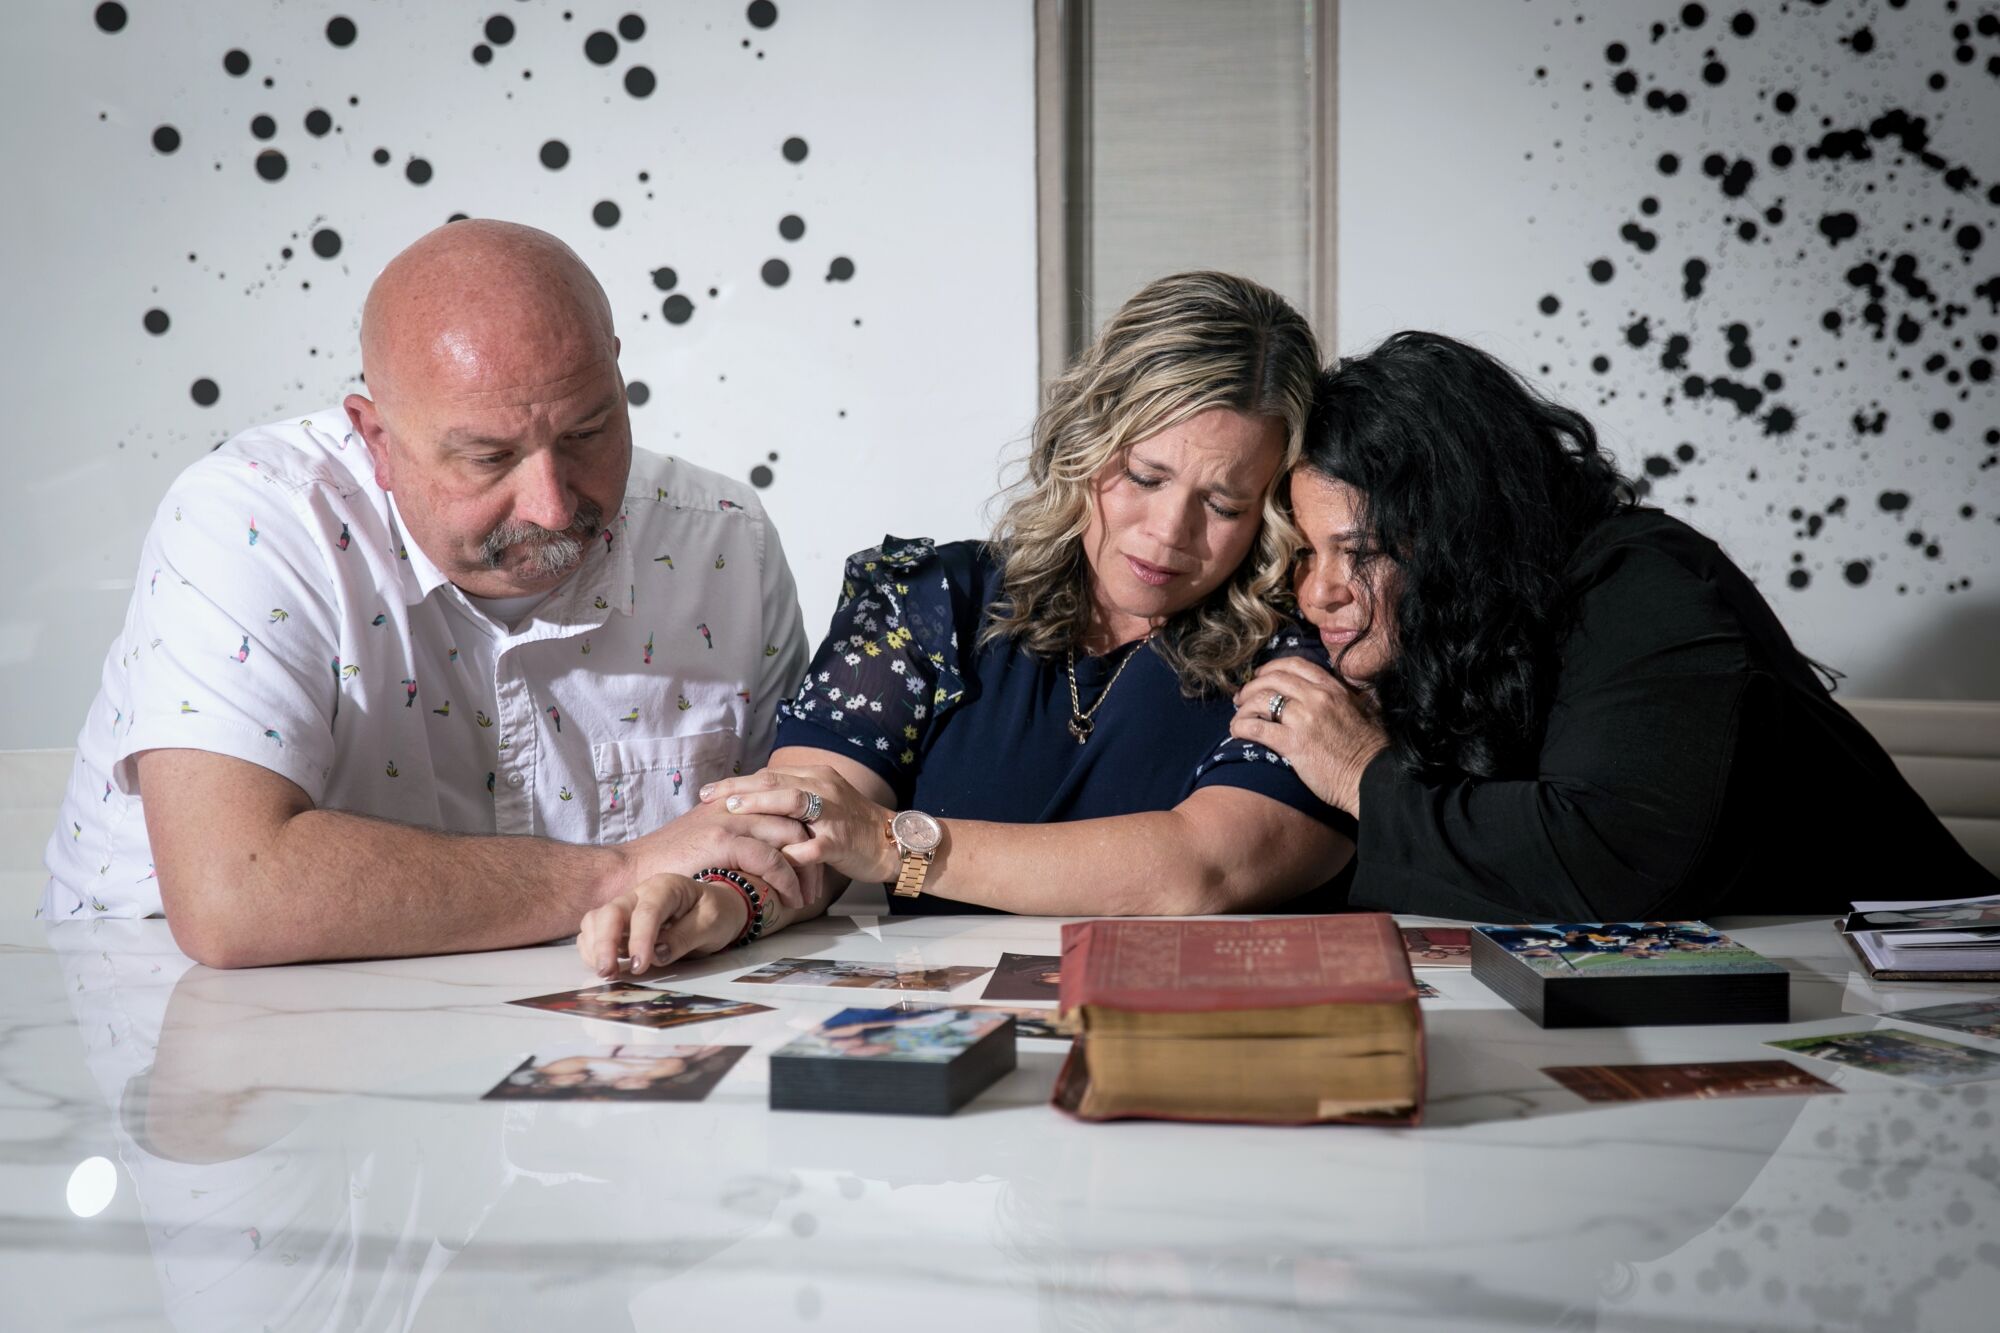 A man at left and two women, who are leaning on each other, sit behind a marble tabletop with photos laid out on it.